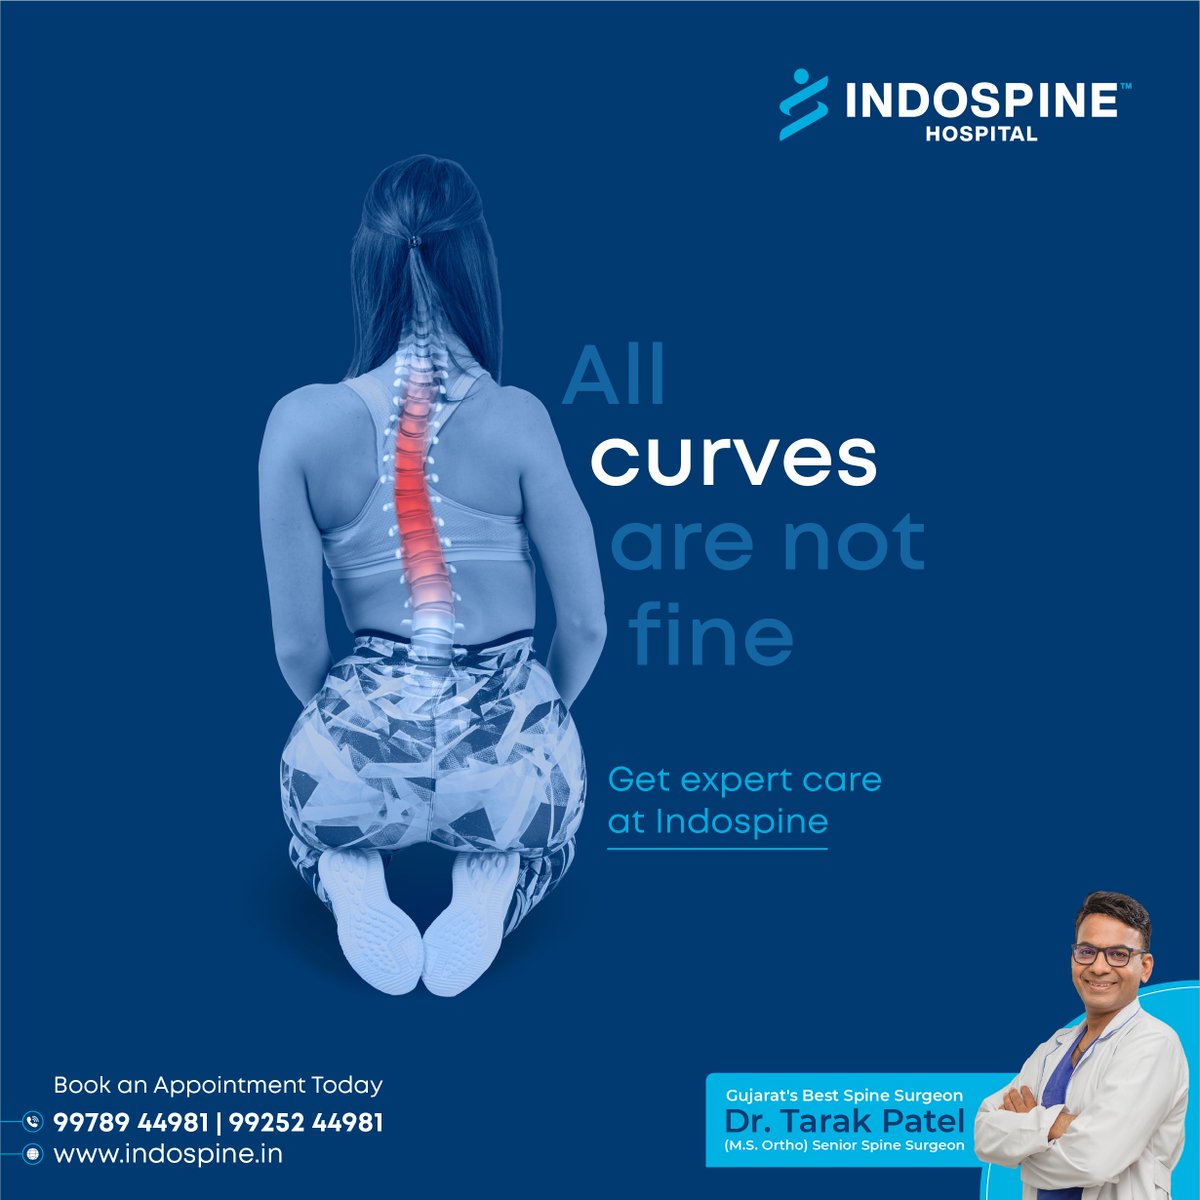 Not all curves are desirable; we mean a curvy spine. Let us straighten up your spine only at Indospine!

Call: 99789 44981 | 99252 44981
Visit: indospine.in

#IndospineHospital #SpinePain #SpineHospital #SpineHealthcare #BestSpineSurgeon #SpineSpecialist #Ahmedabad